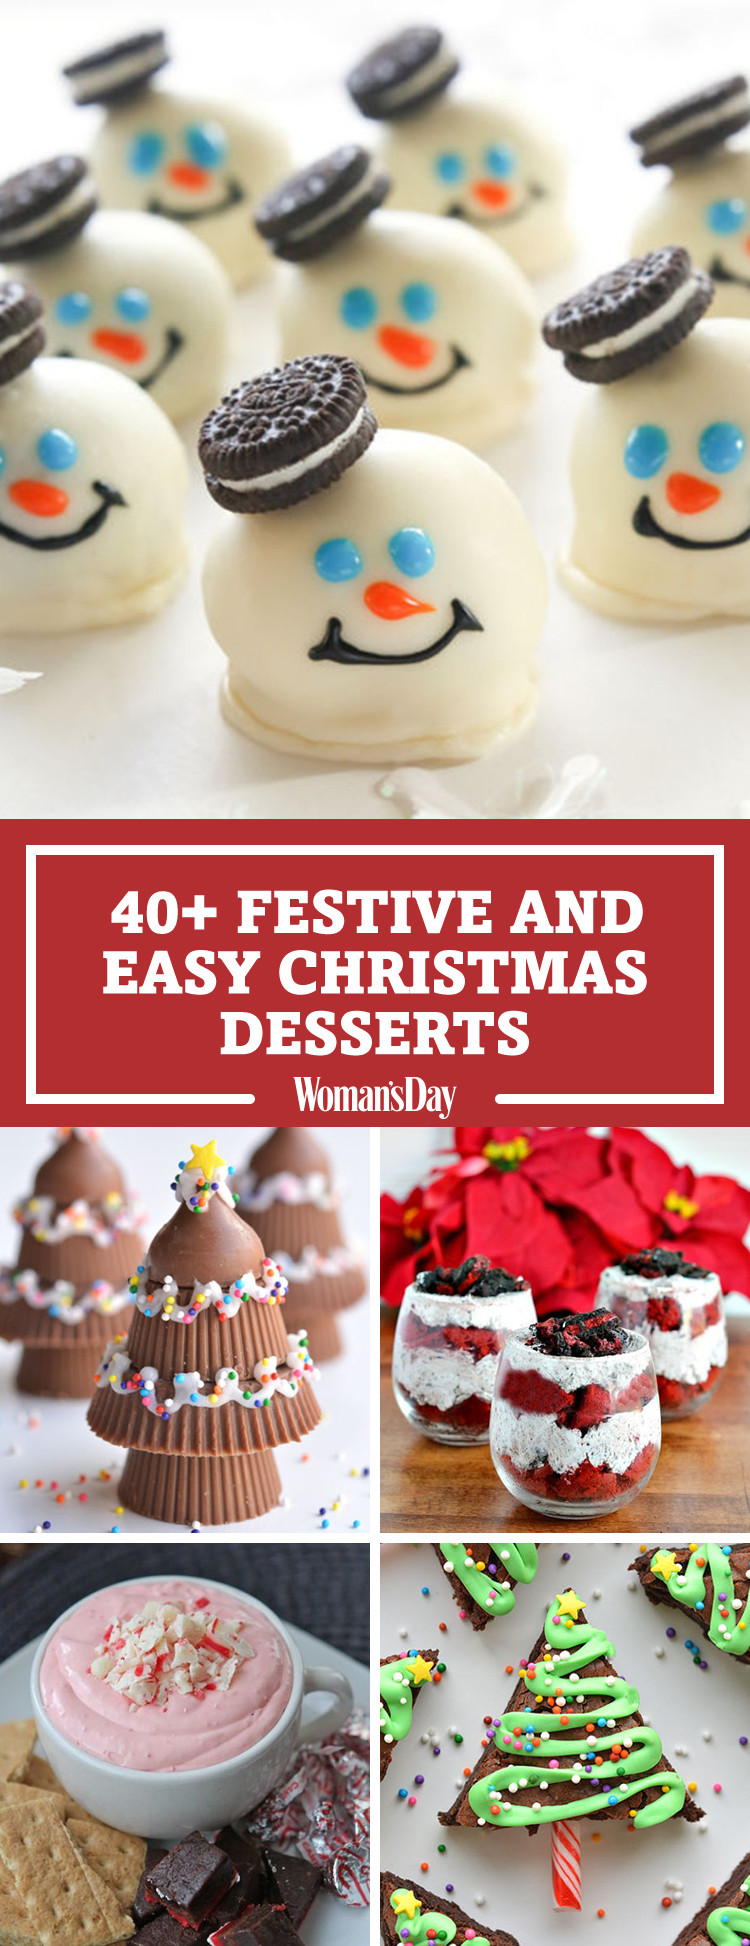 Traditional Christmas Desserts
 57 Easy Christmas Dessert Recipes Best Ideas for Fun